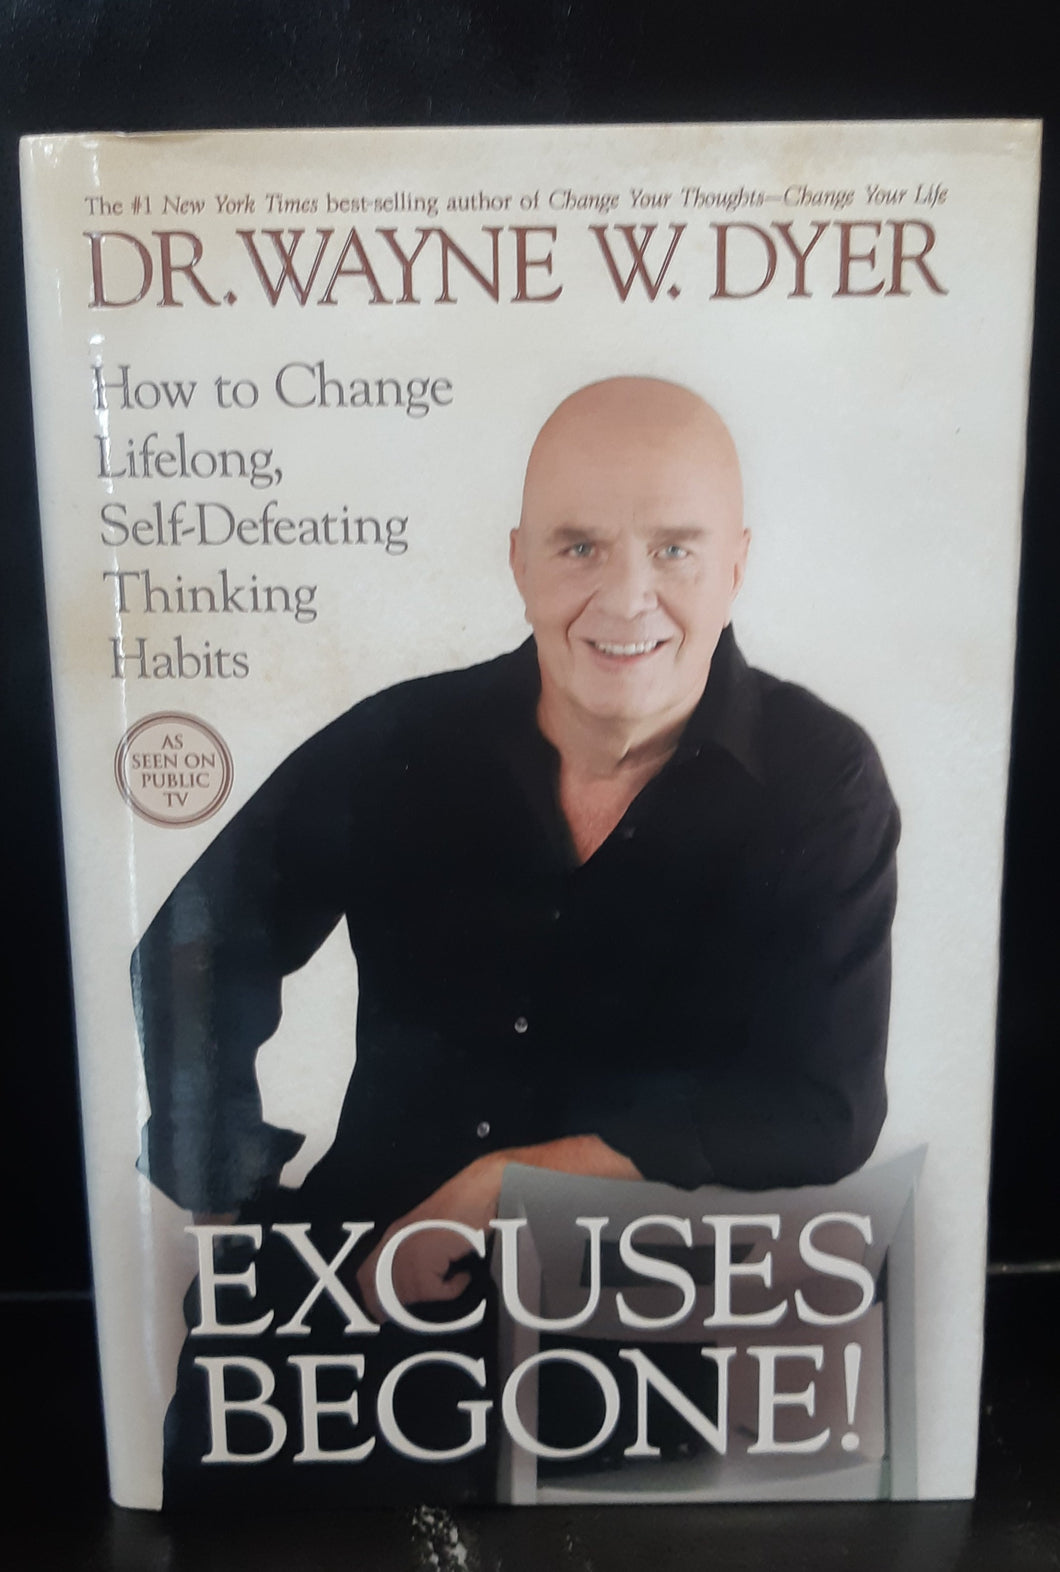 Excuses Begone! by Dr. Wayne W. Dyer